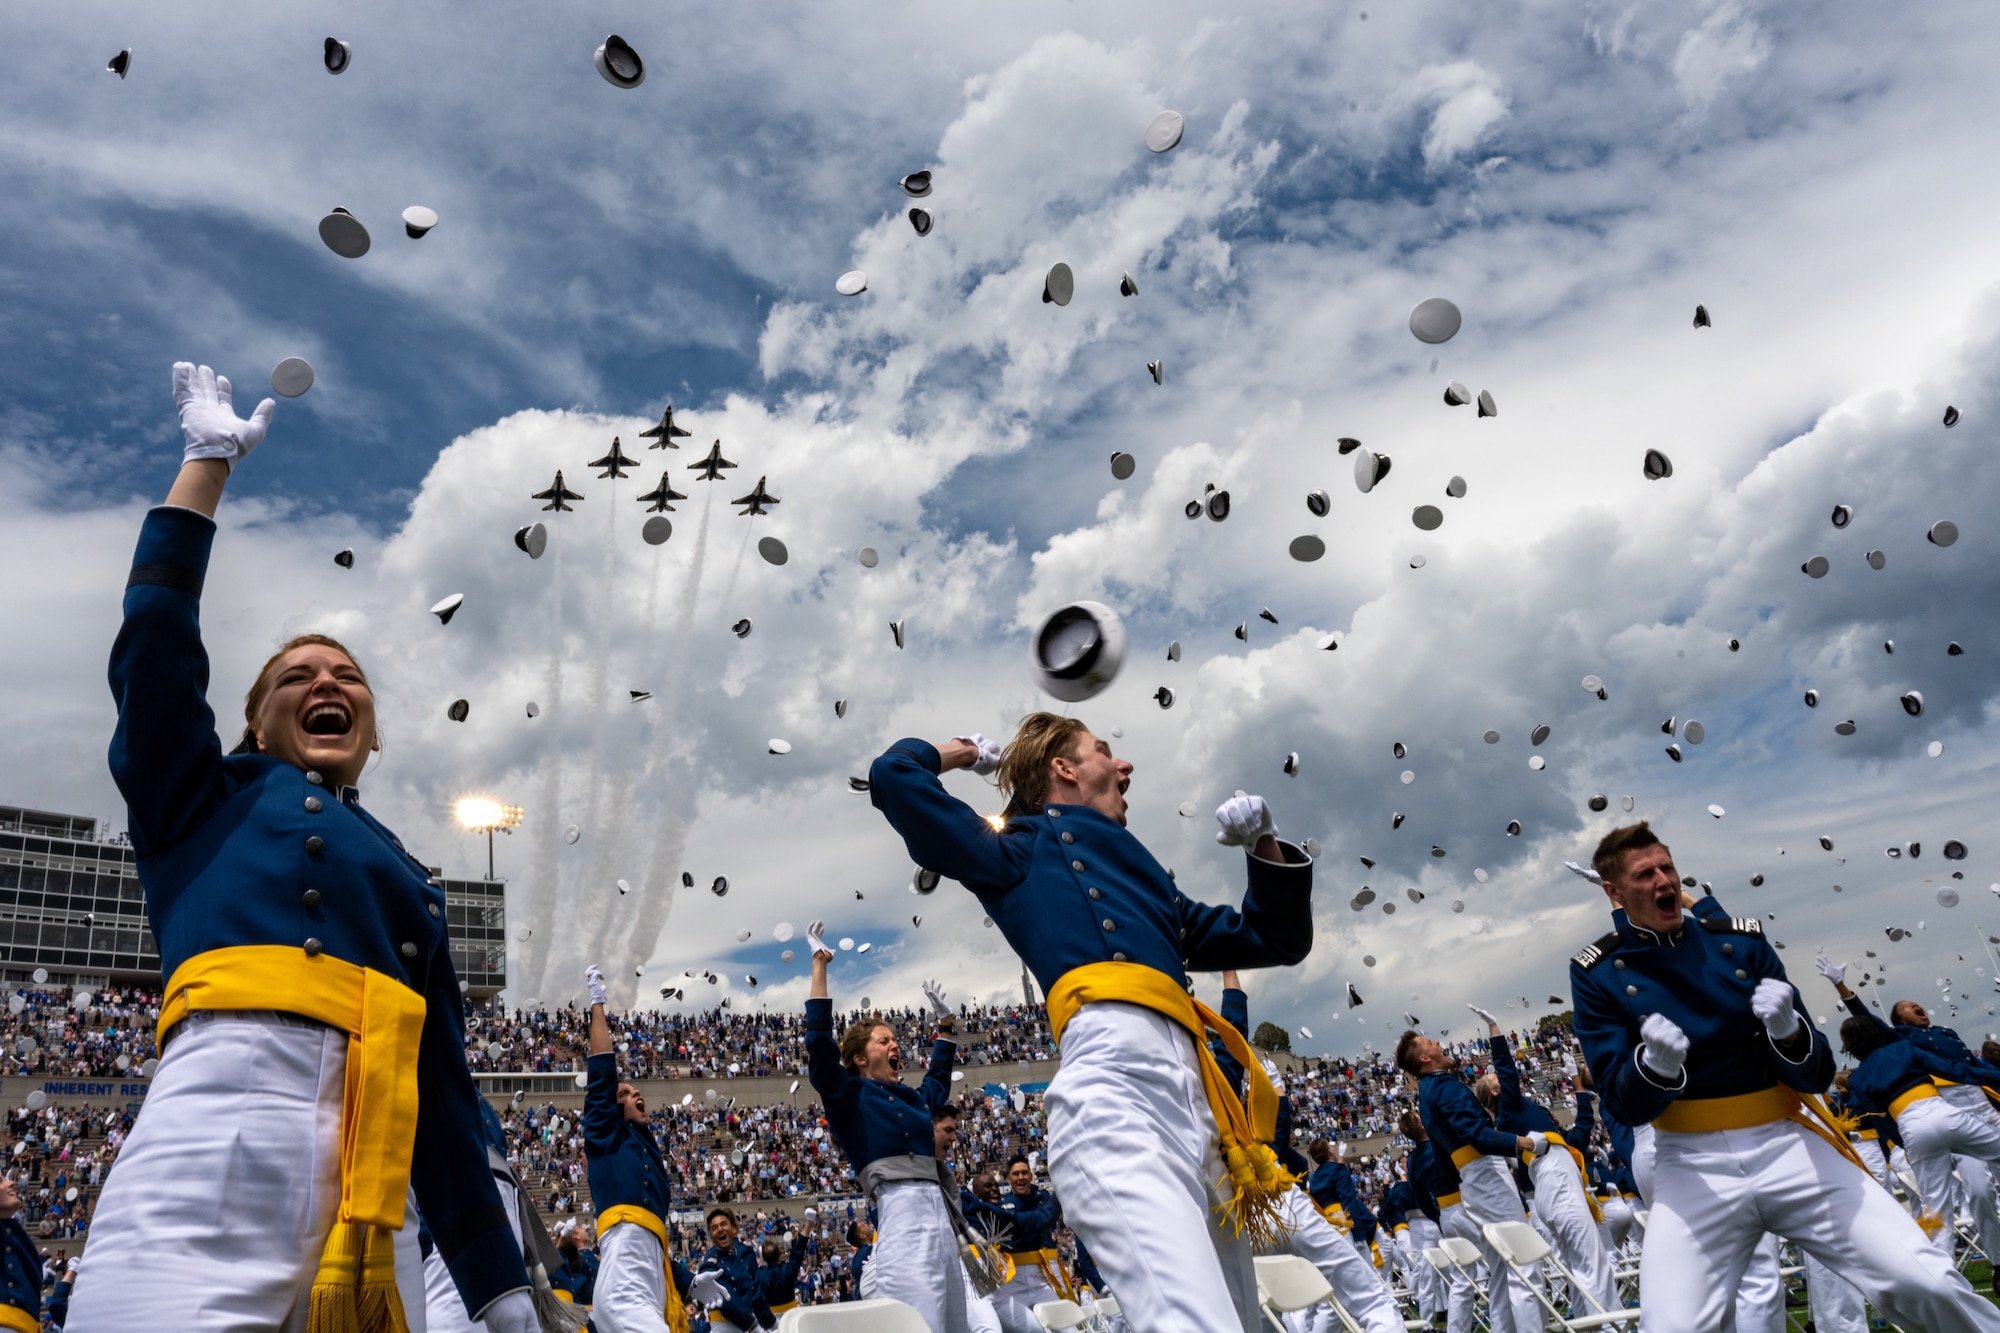 The U.S. Air Force Air Demonstration Squadron "Thunderbirds" perform a fly-over at the Air Force Academy graduation at Falcon Stadium in Colorado Springs, Colo., May 26, 2021. In all, 1,019 cadets graduated in front of a select crowd due to safety and health precautions set in place for the ceremony as the Academy continues to operate during the pandemic. (U.S. Air Force photo by Staff. Sgt Laurel M. Richards)